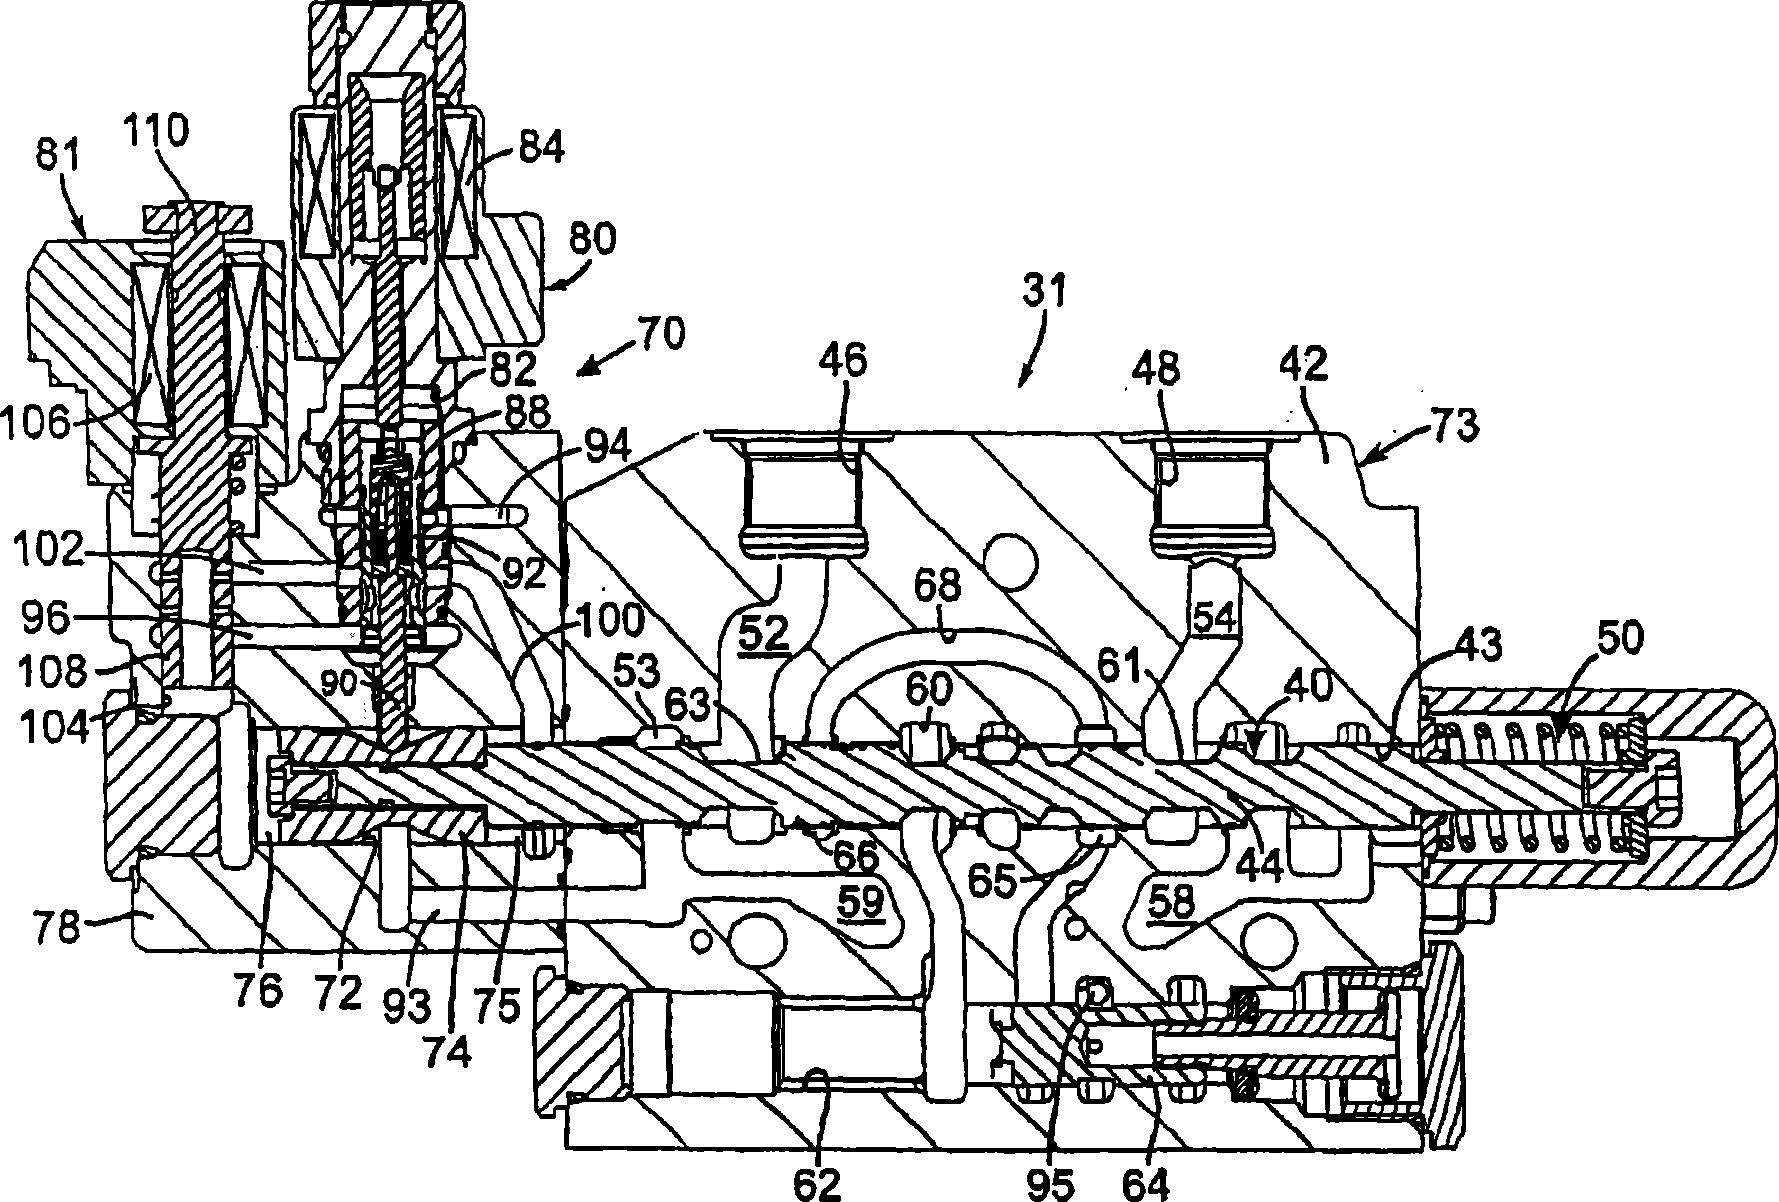 Hydraulic valve assembly with direction sliding valve and regeneration flow dividing valve with pressure compensation